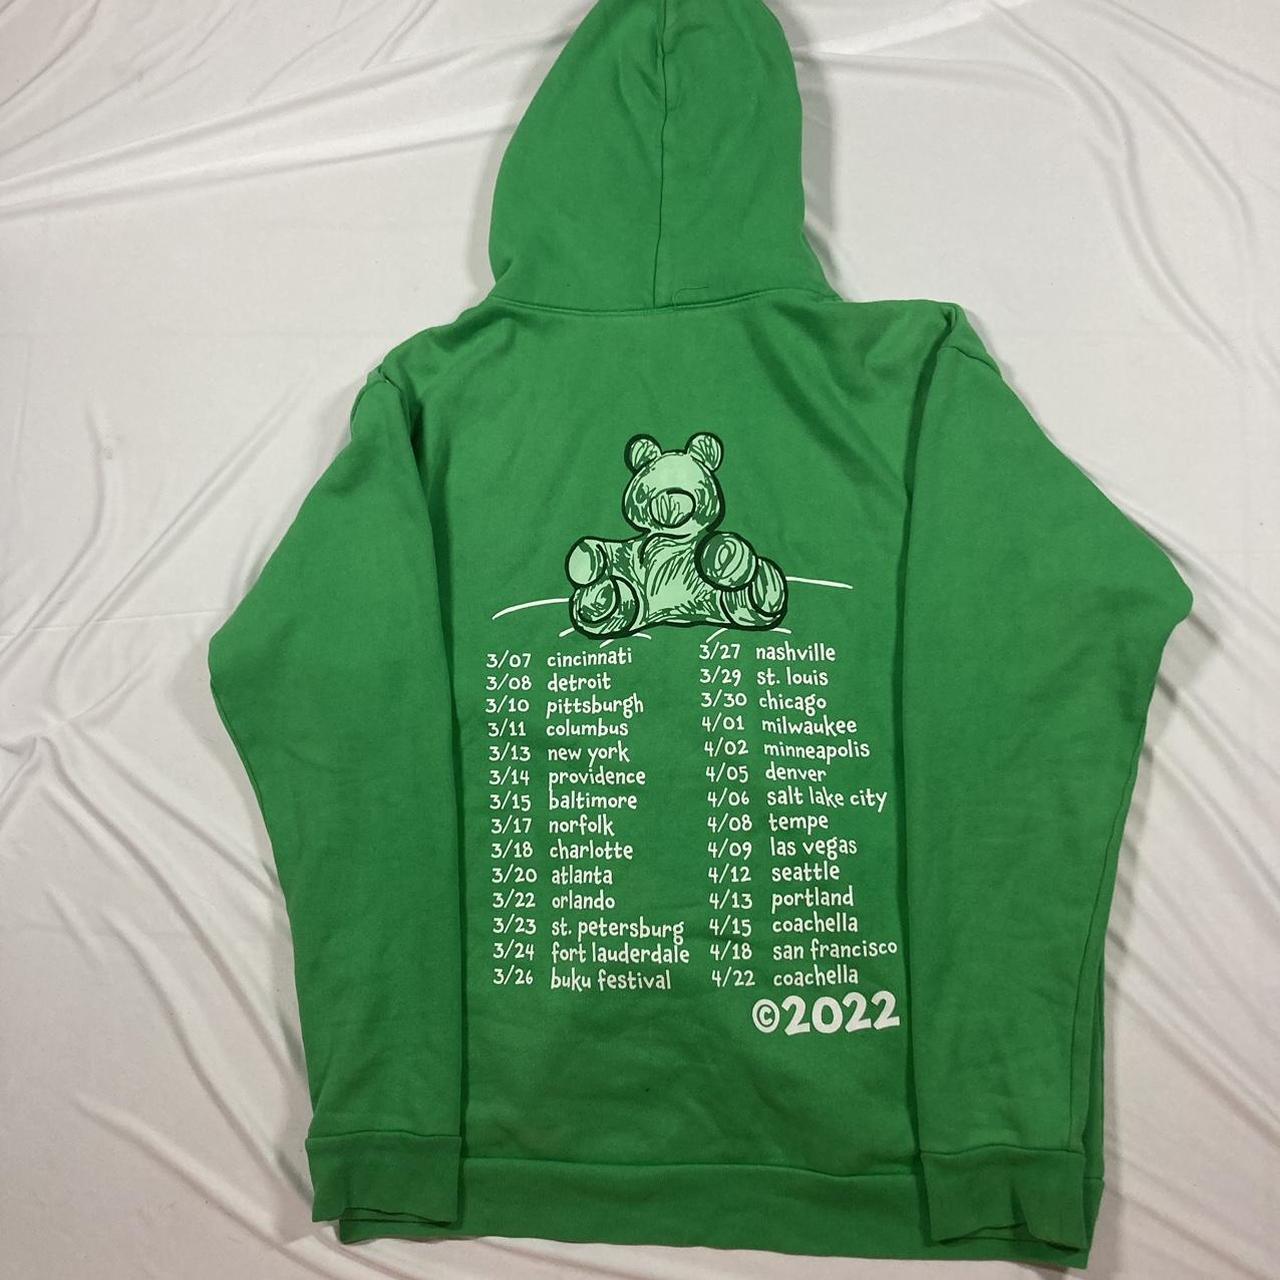 2022 Green Baby Keem Tour Hoodie Size L But Fits... - Depop